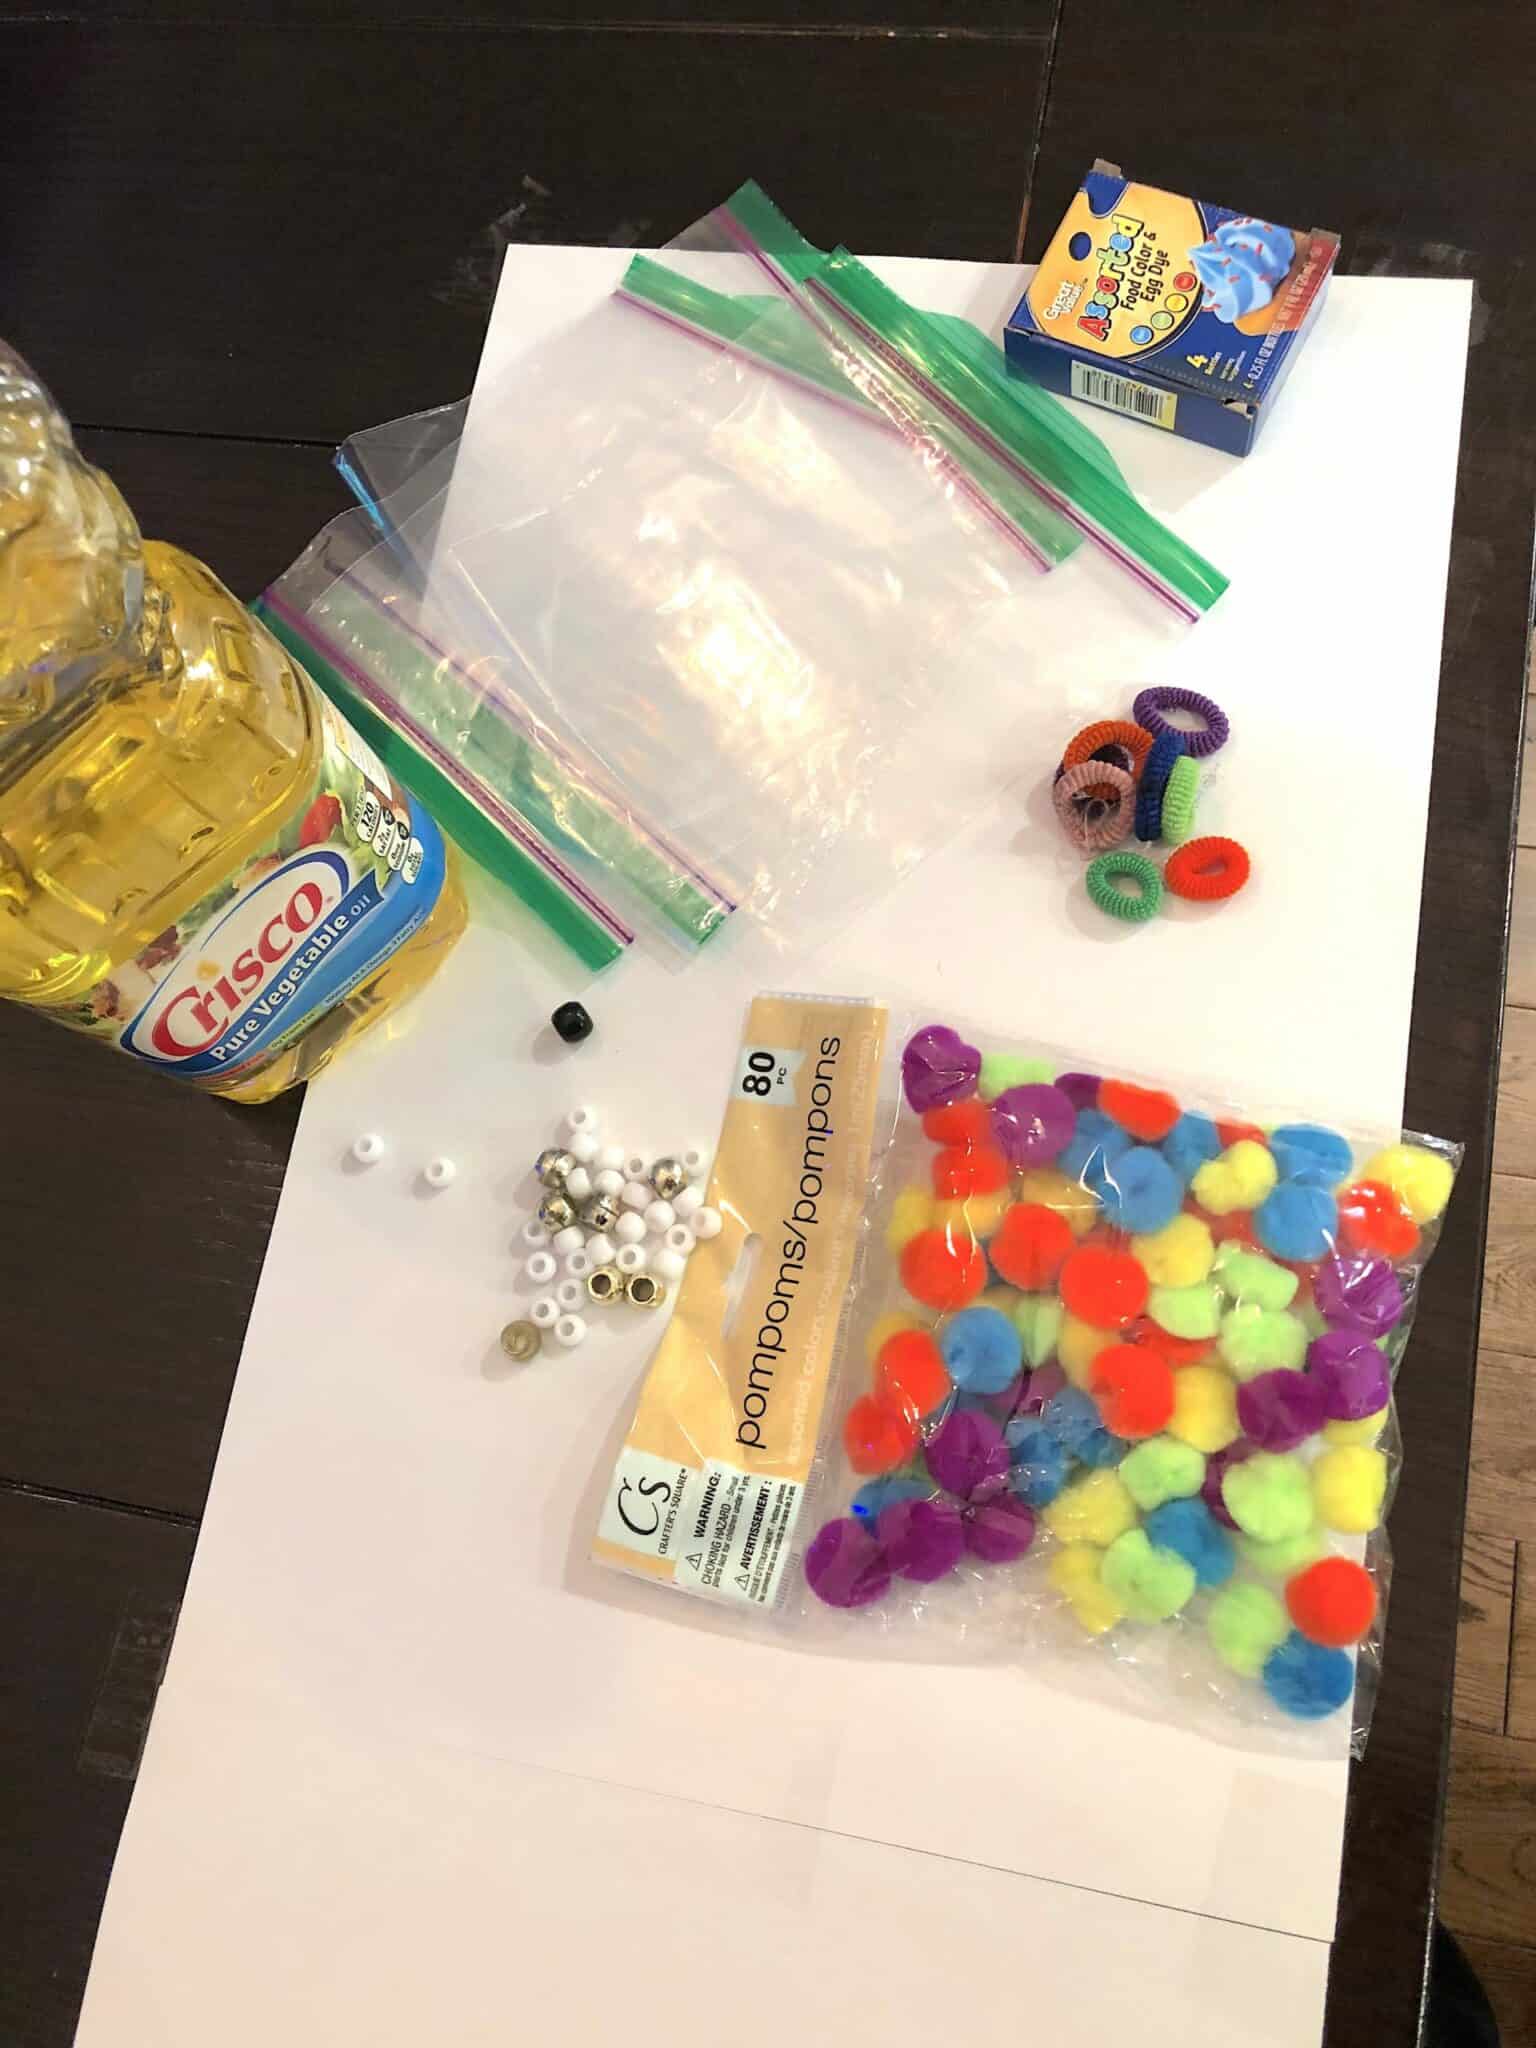 Learning and Exploring Through Play: Sensory Bags